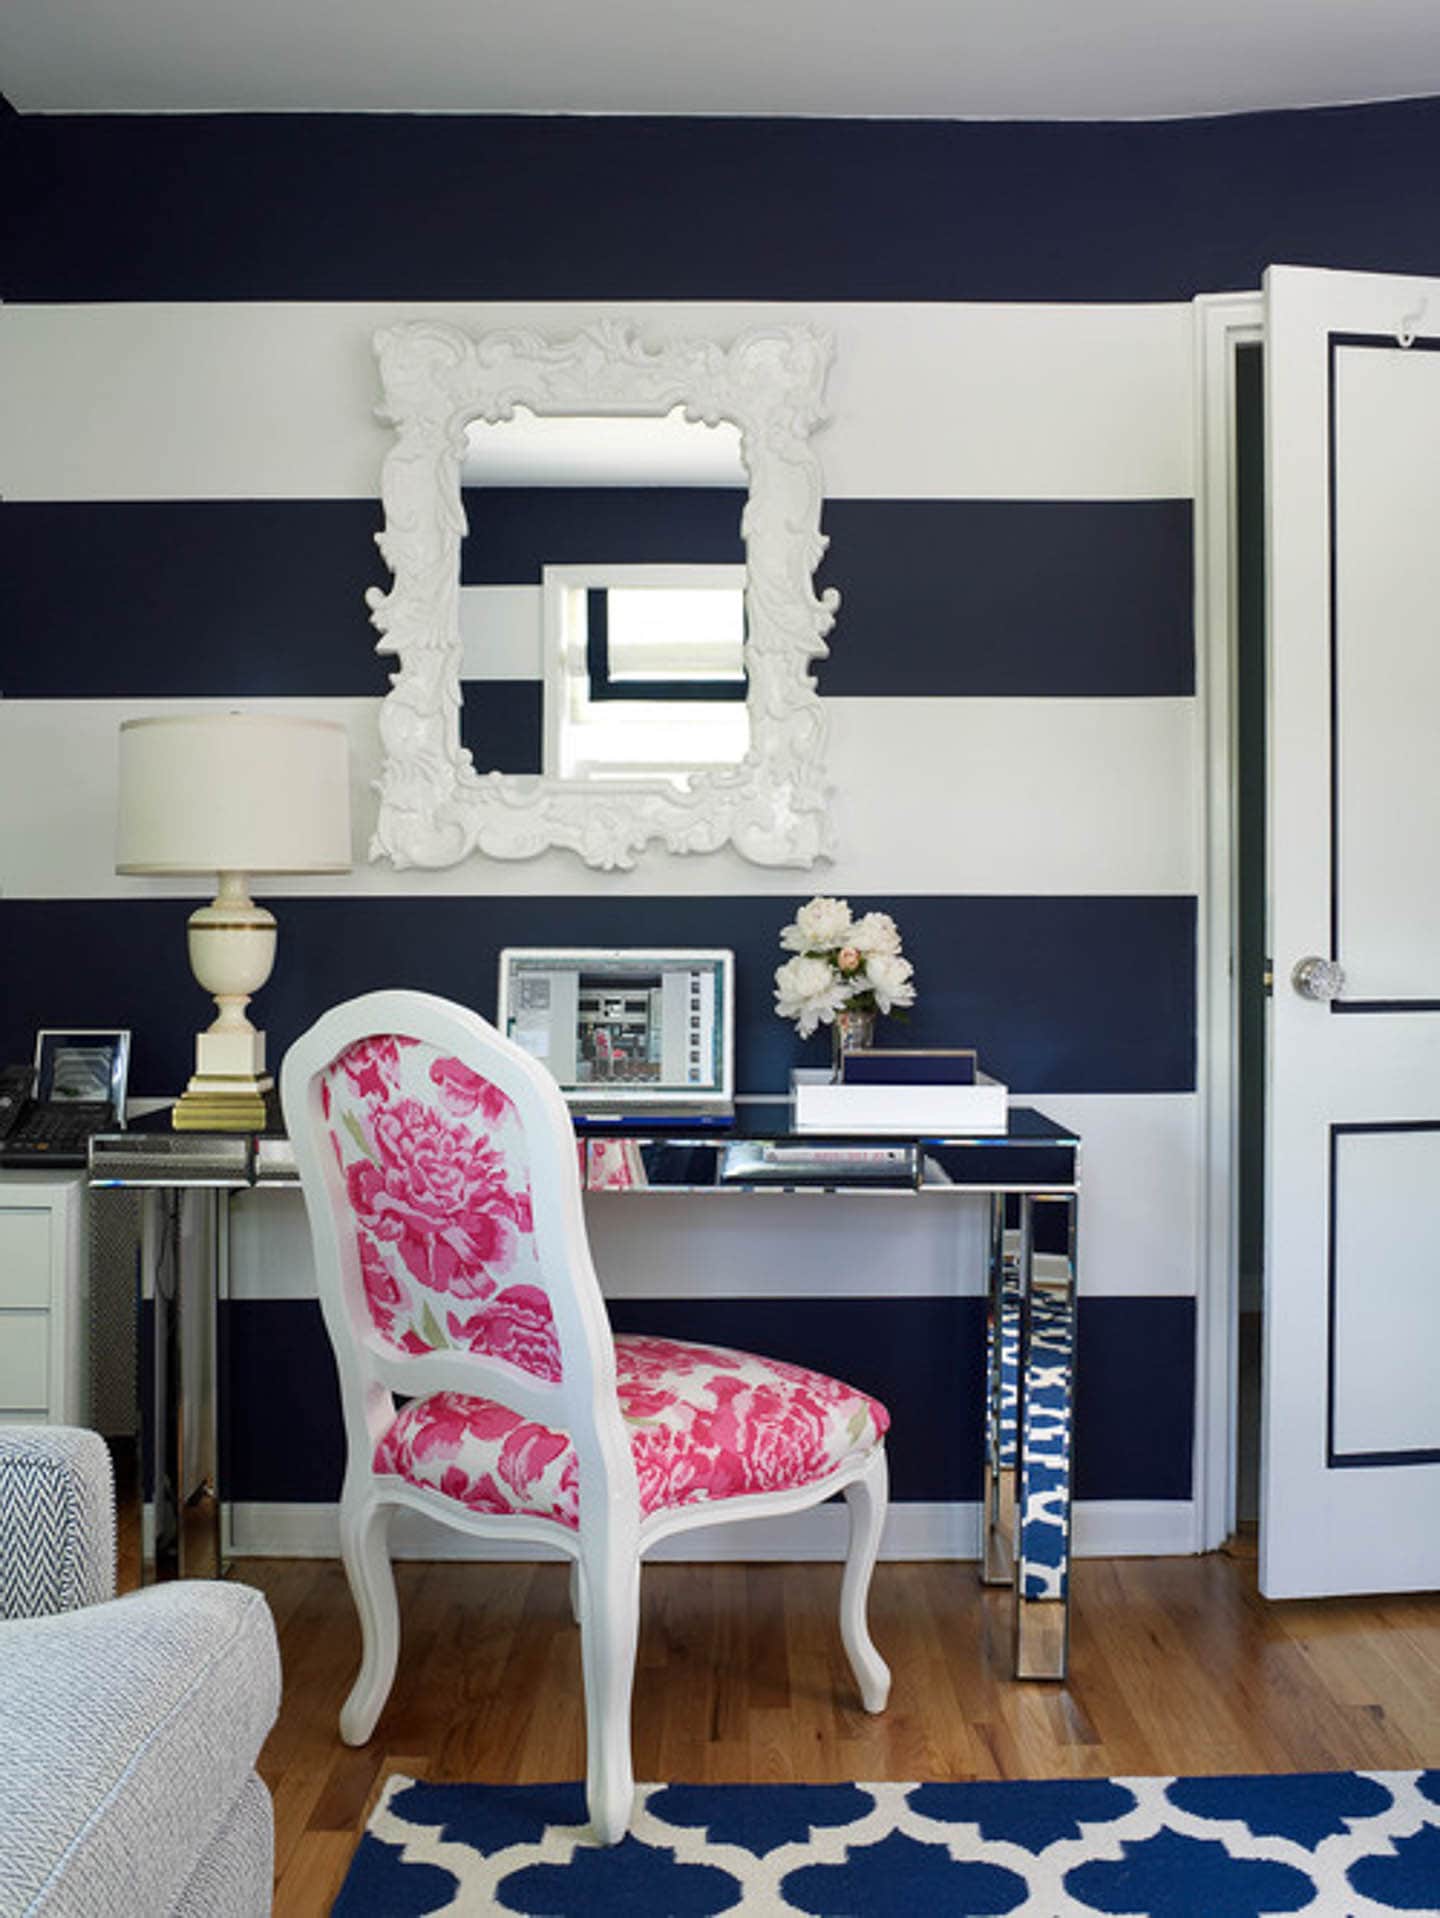 Small home office with wide navy blue and white horizontal stripes, a mirror desk, blue and white area rug and a bright pink and white chair